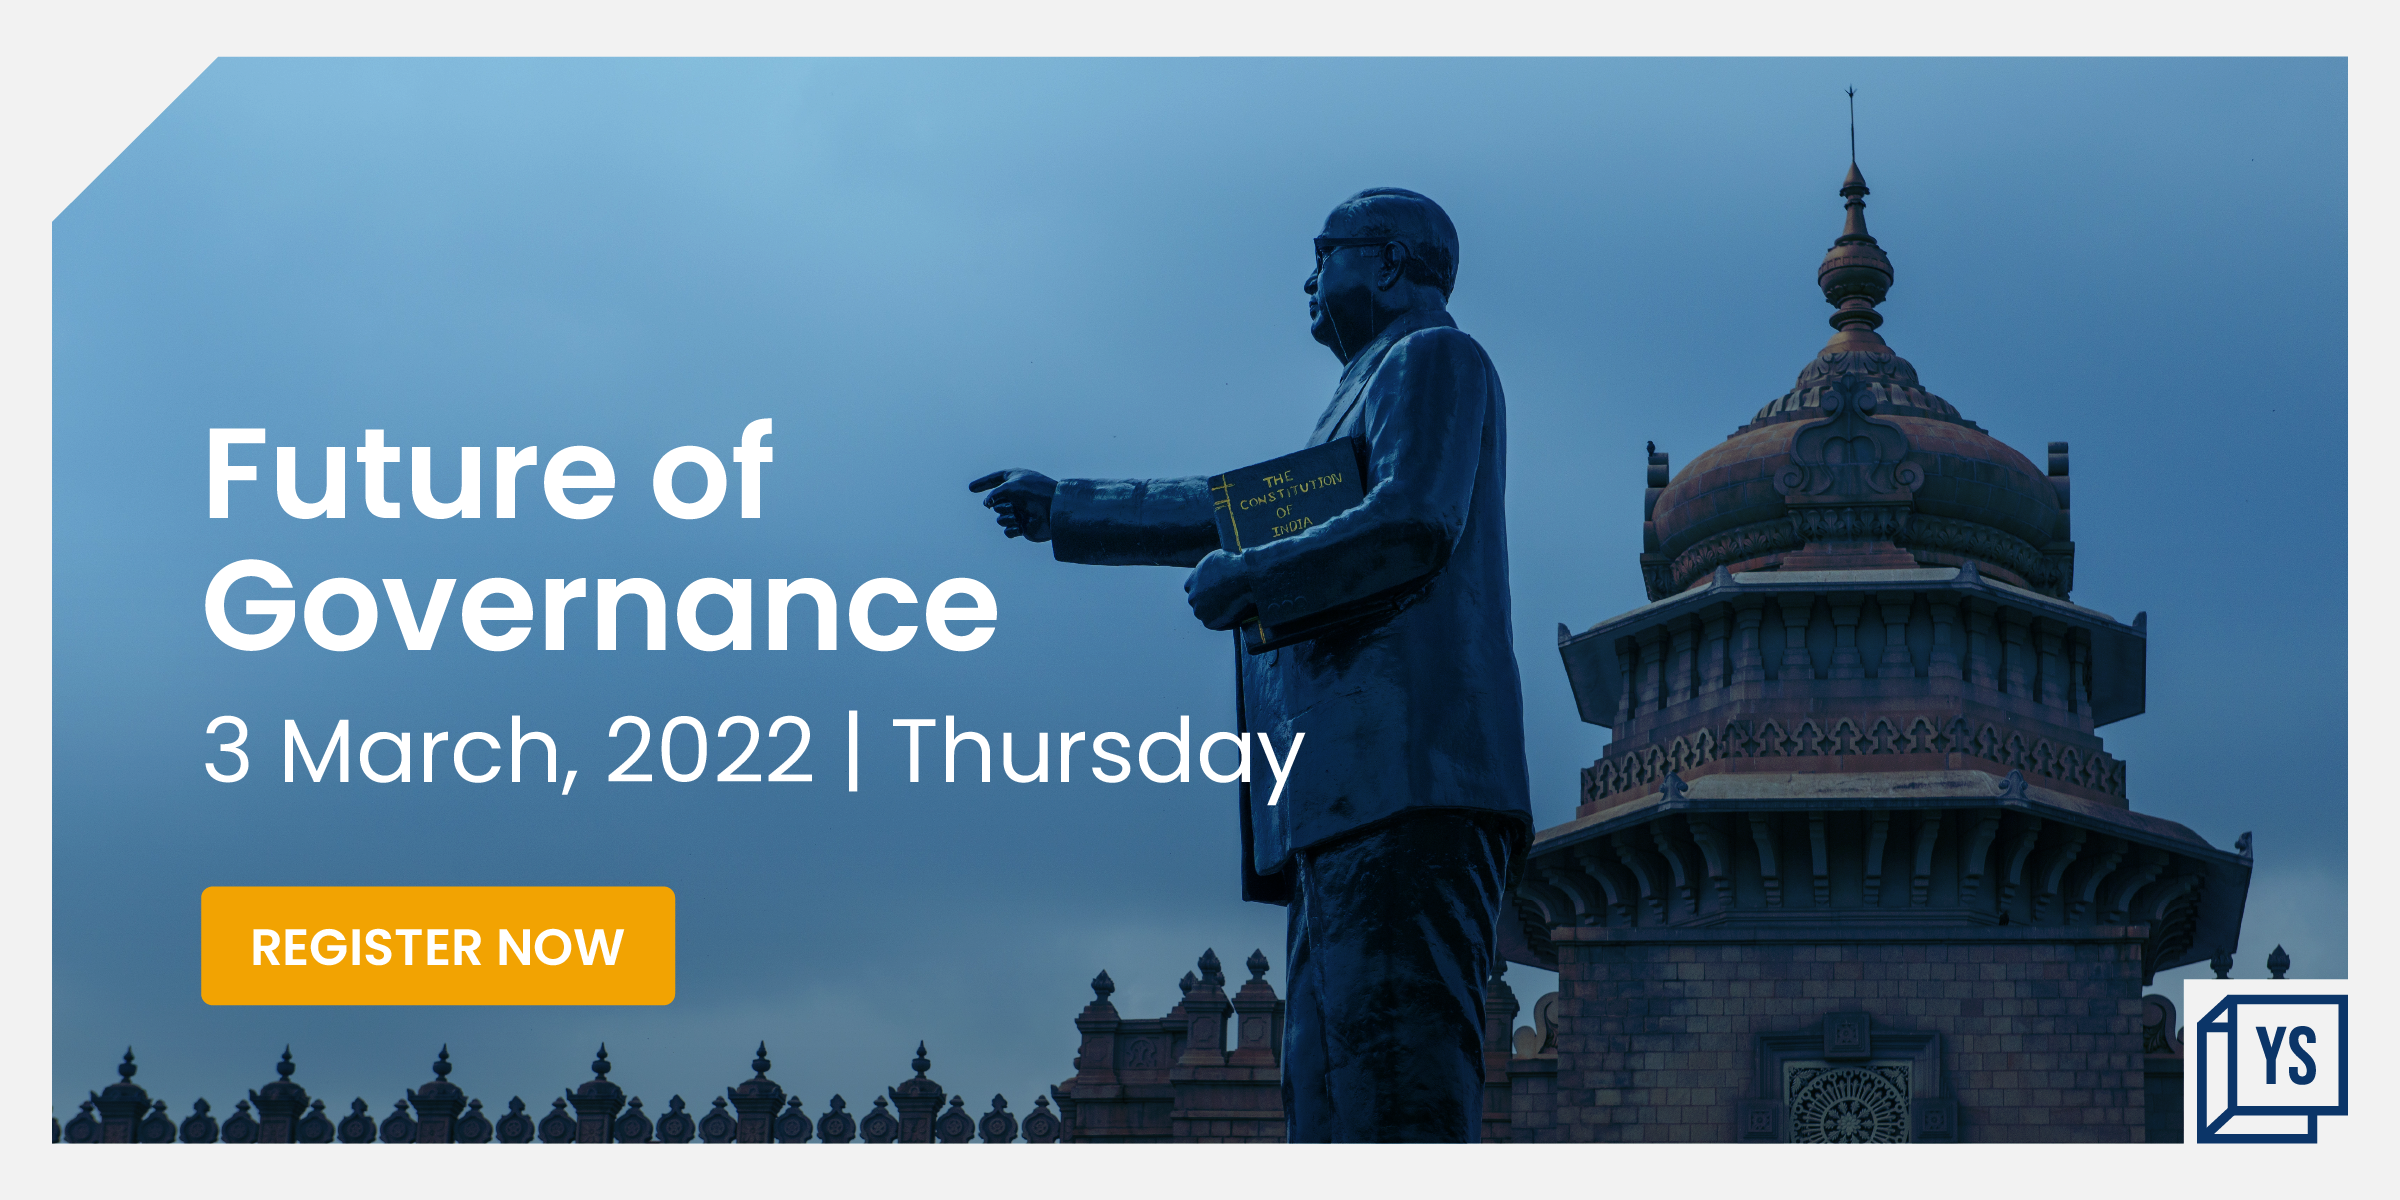 ‘Future of Governance’ shines a light on India’s successful tryst with e-governance 

